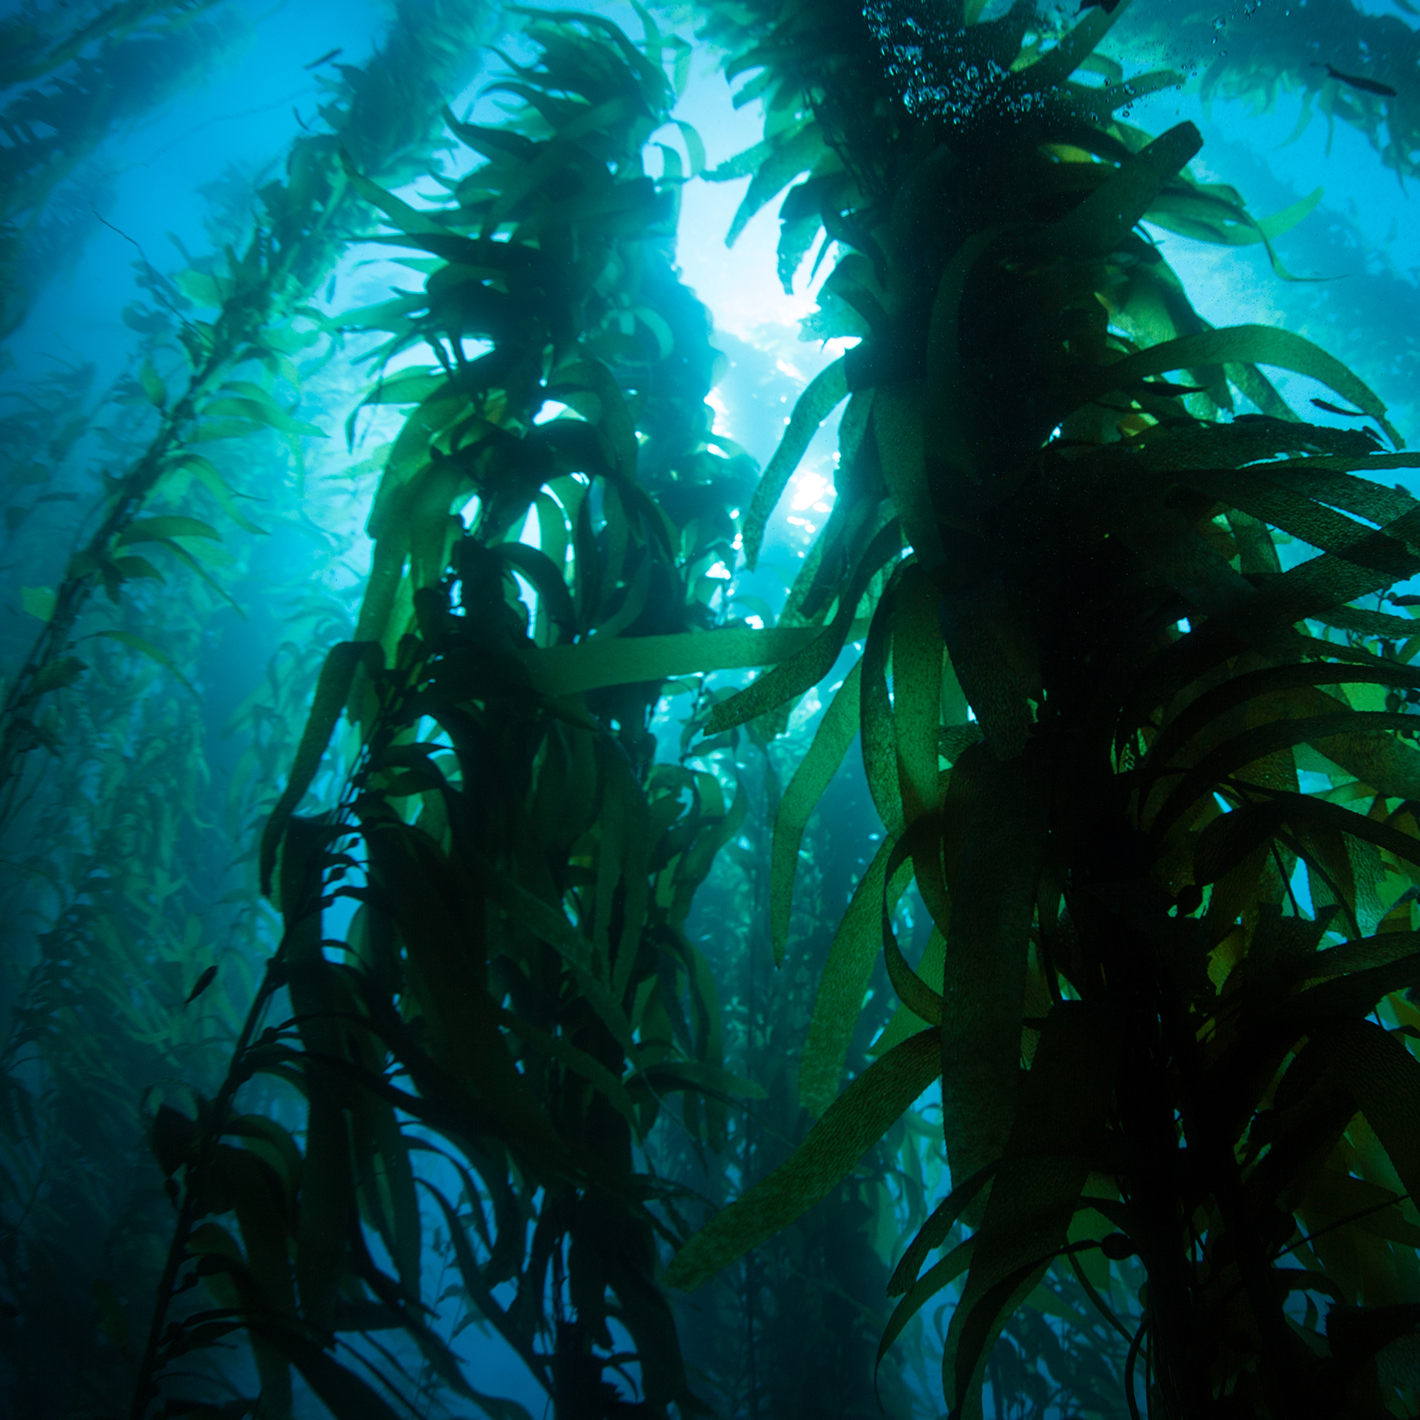 Kelp forest out in the open ocean.